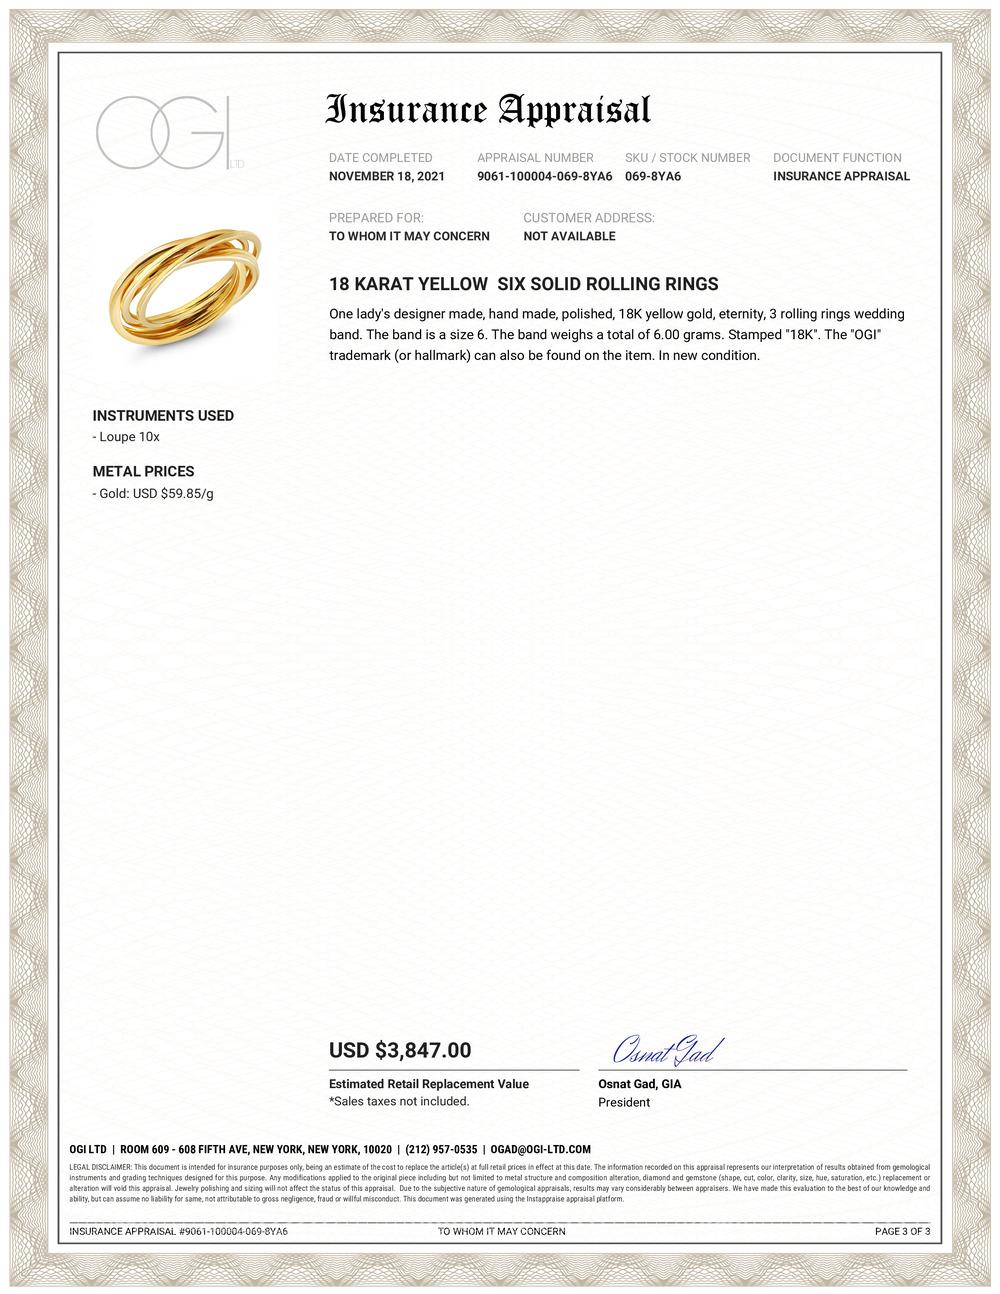 Eighteen karat yellow gold six rolling ring
Each band measures 1.5 millimeter
Ring size 6
Width of band 6 millimeters
Comfort fit
Handmade in the USA
Six die striking process bands, a process that utilizes an enormous amount of pressure to form